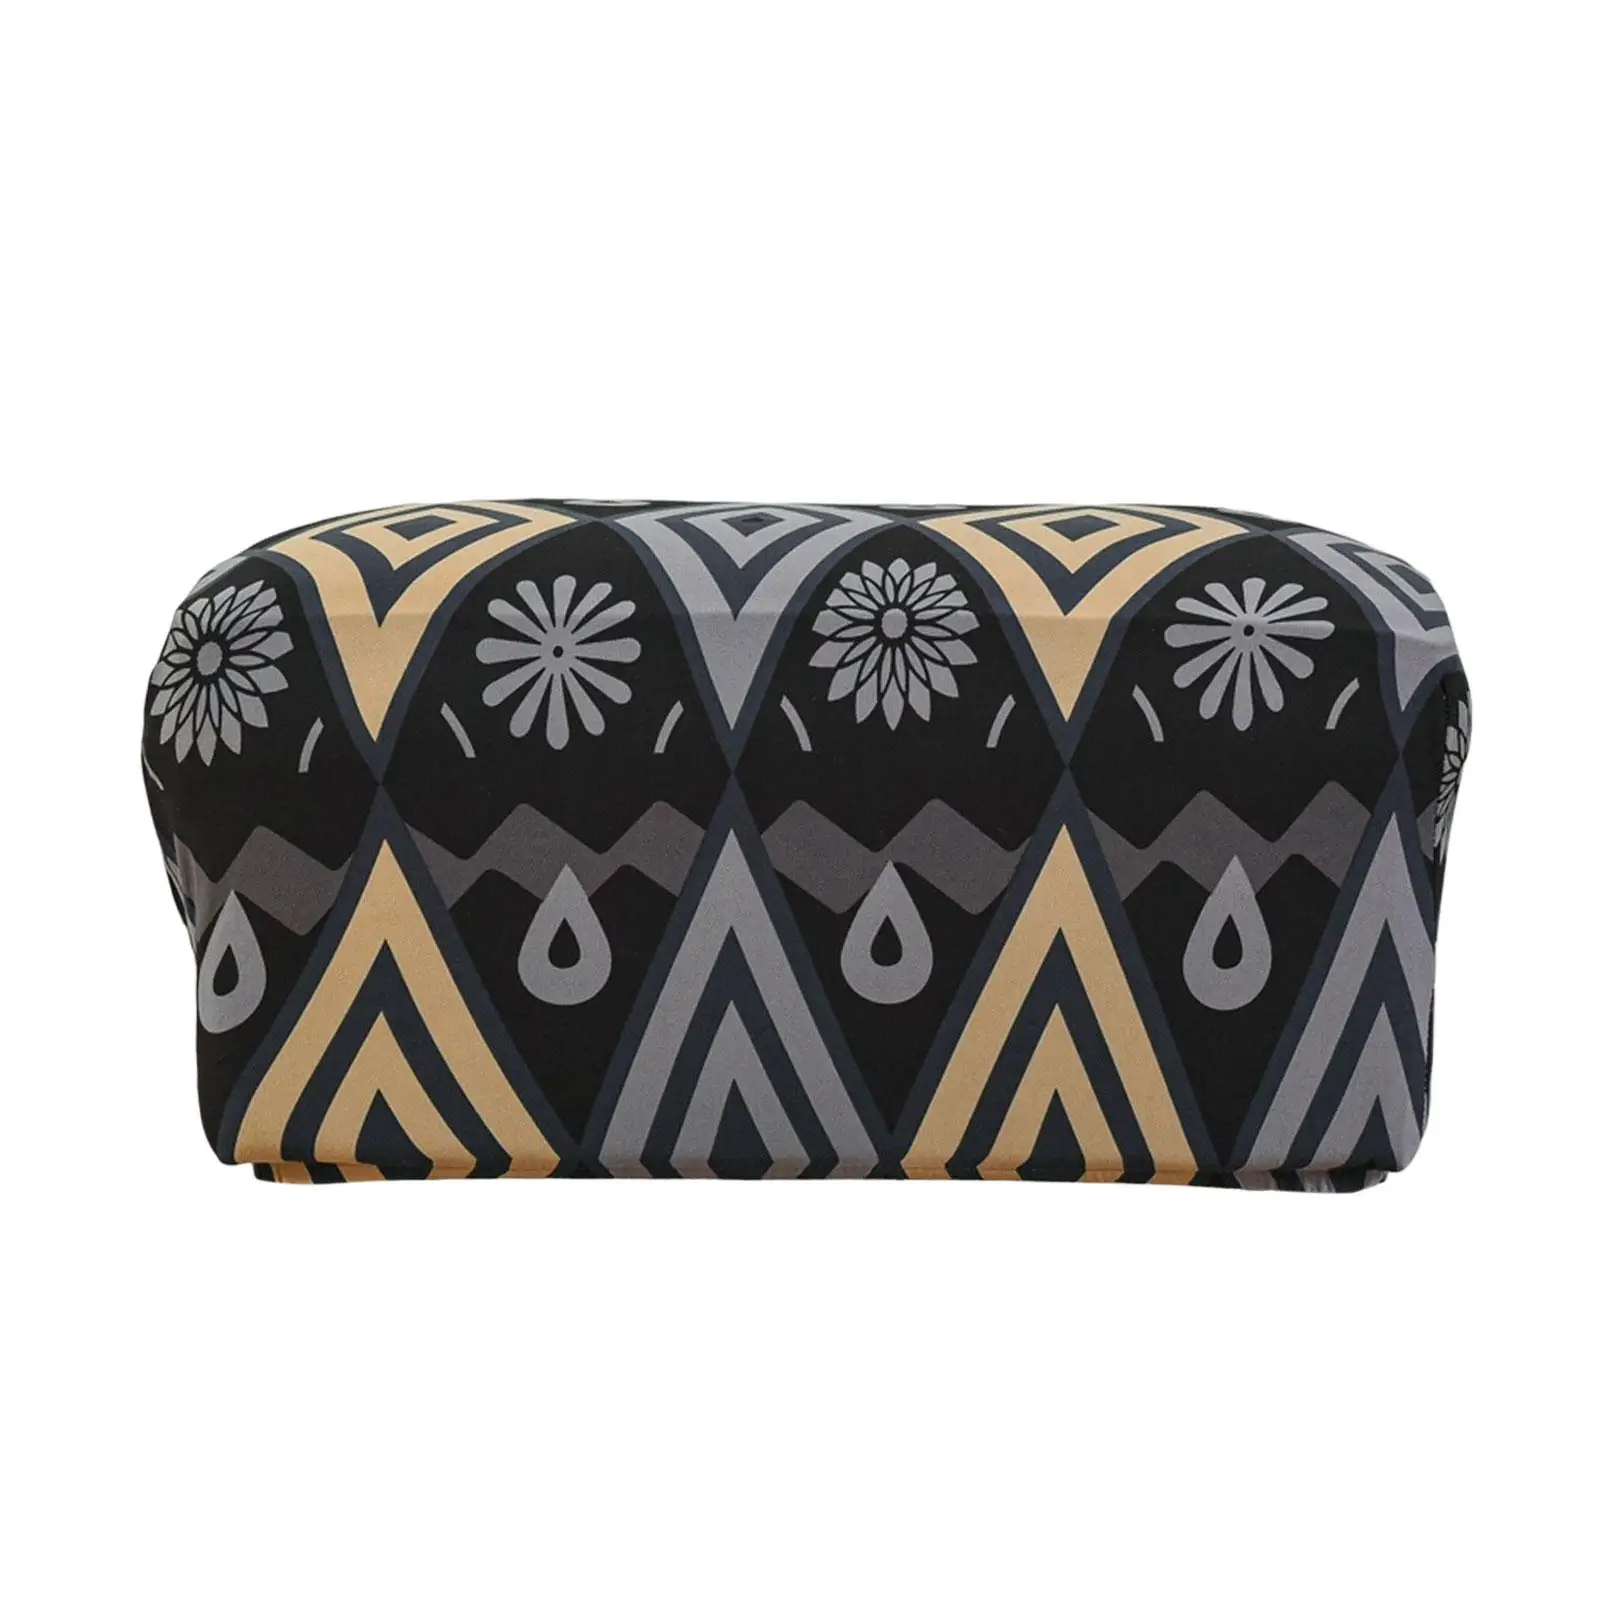 Stretch Ottoman Covers Printed Protector Cover Removable for Living Room